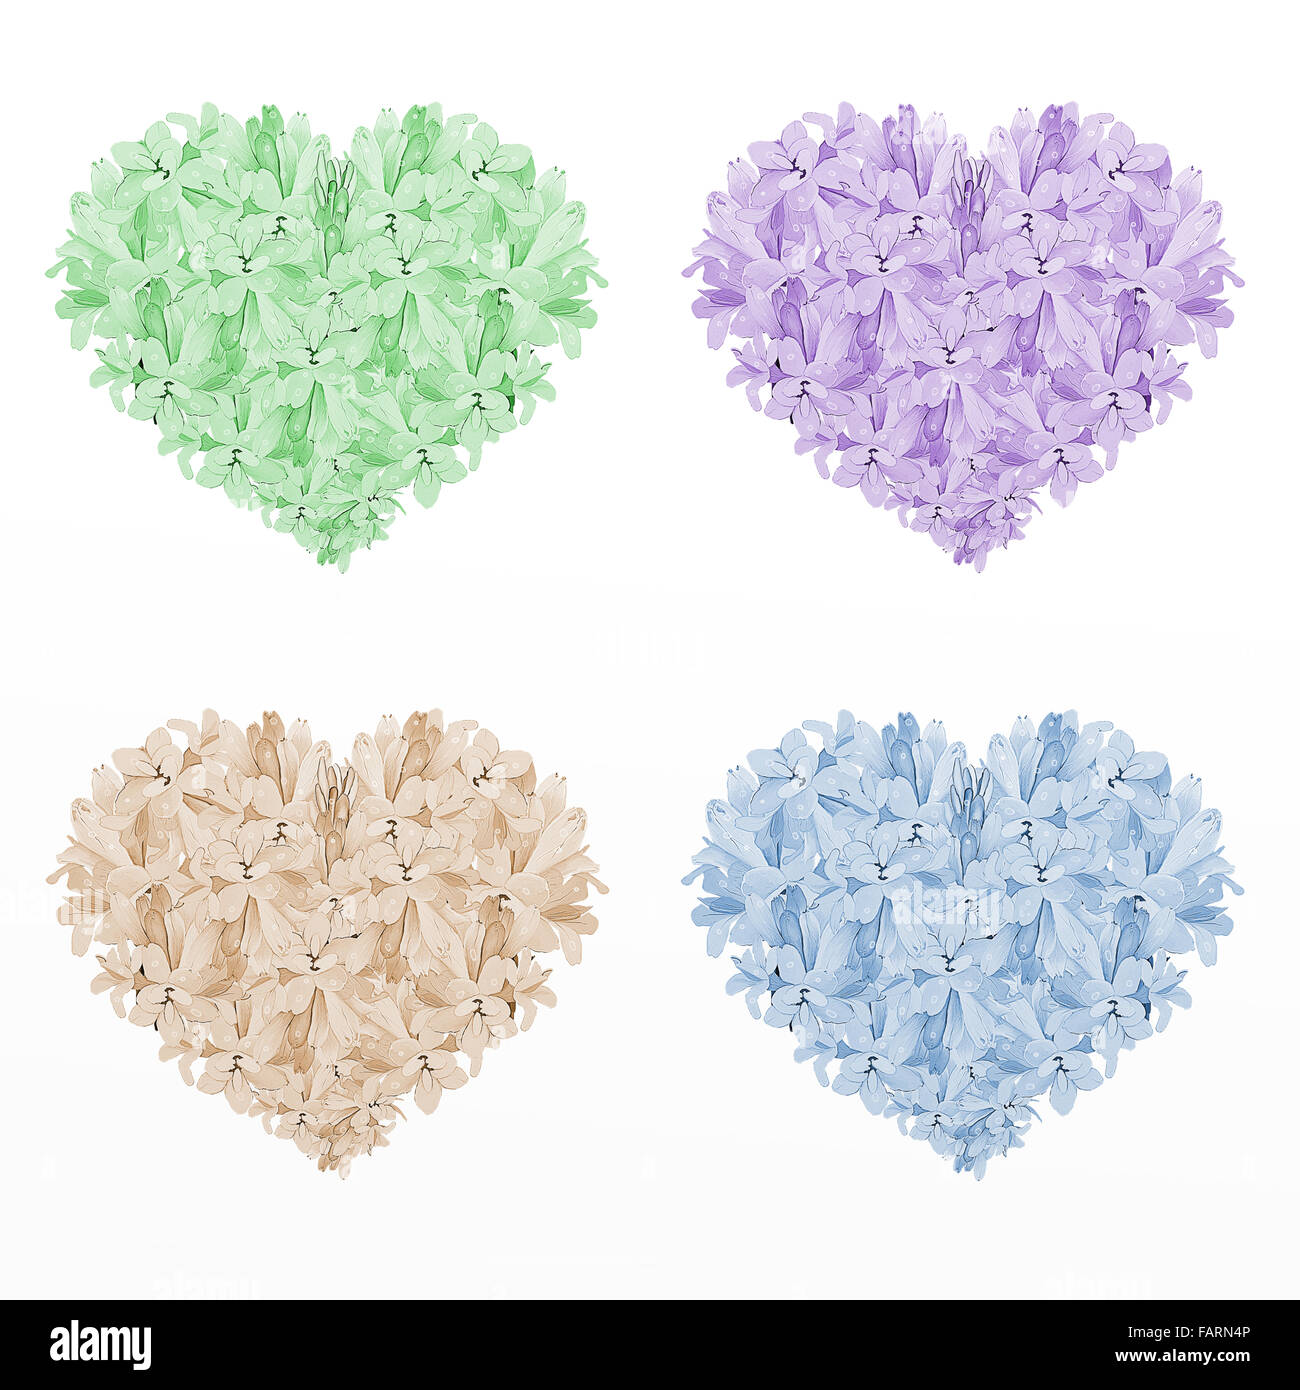 Four Colors of Heart Shape Tuberose Flowers,on A White Background (Green, Violet, Brown and Blue Colors) Stock Photo